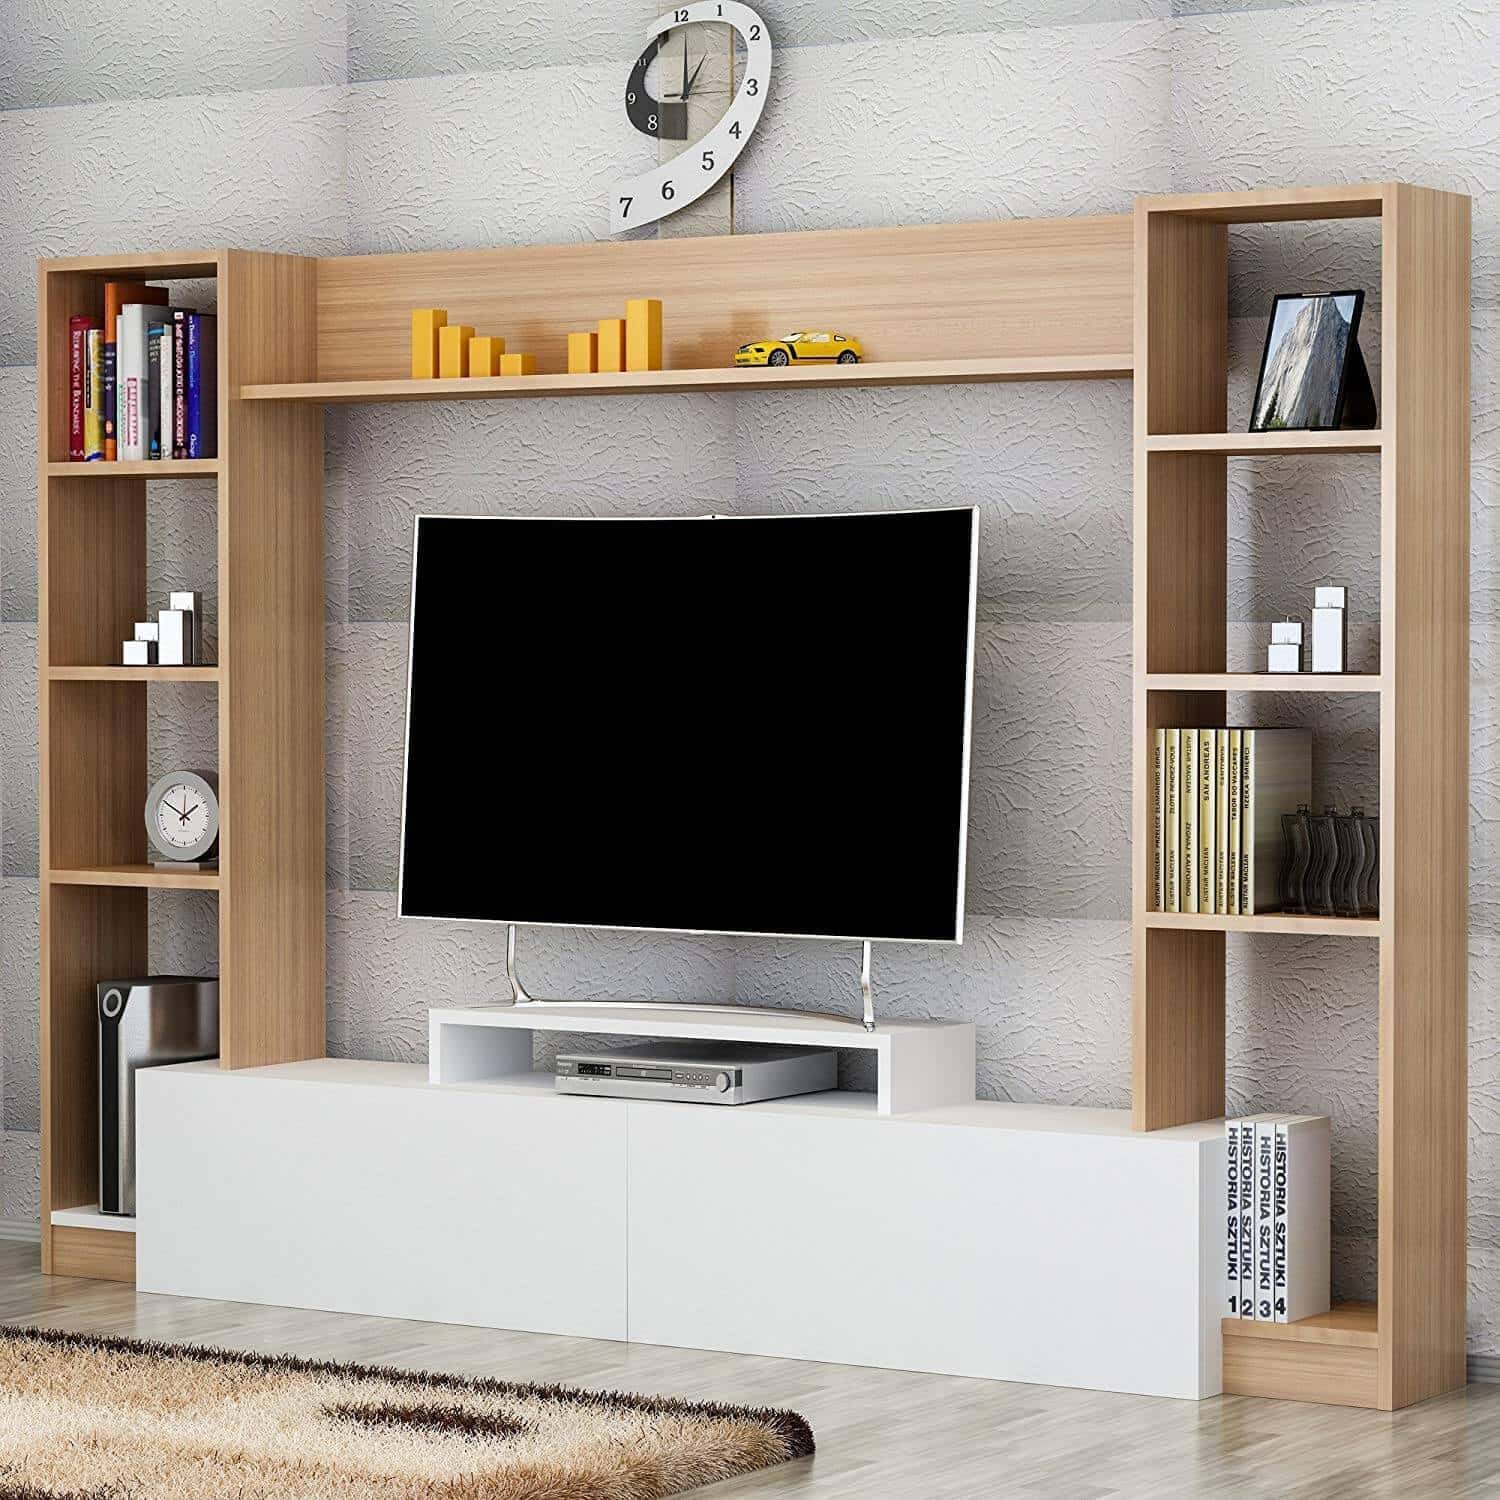 Functional TV Stands With Built in Storage